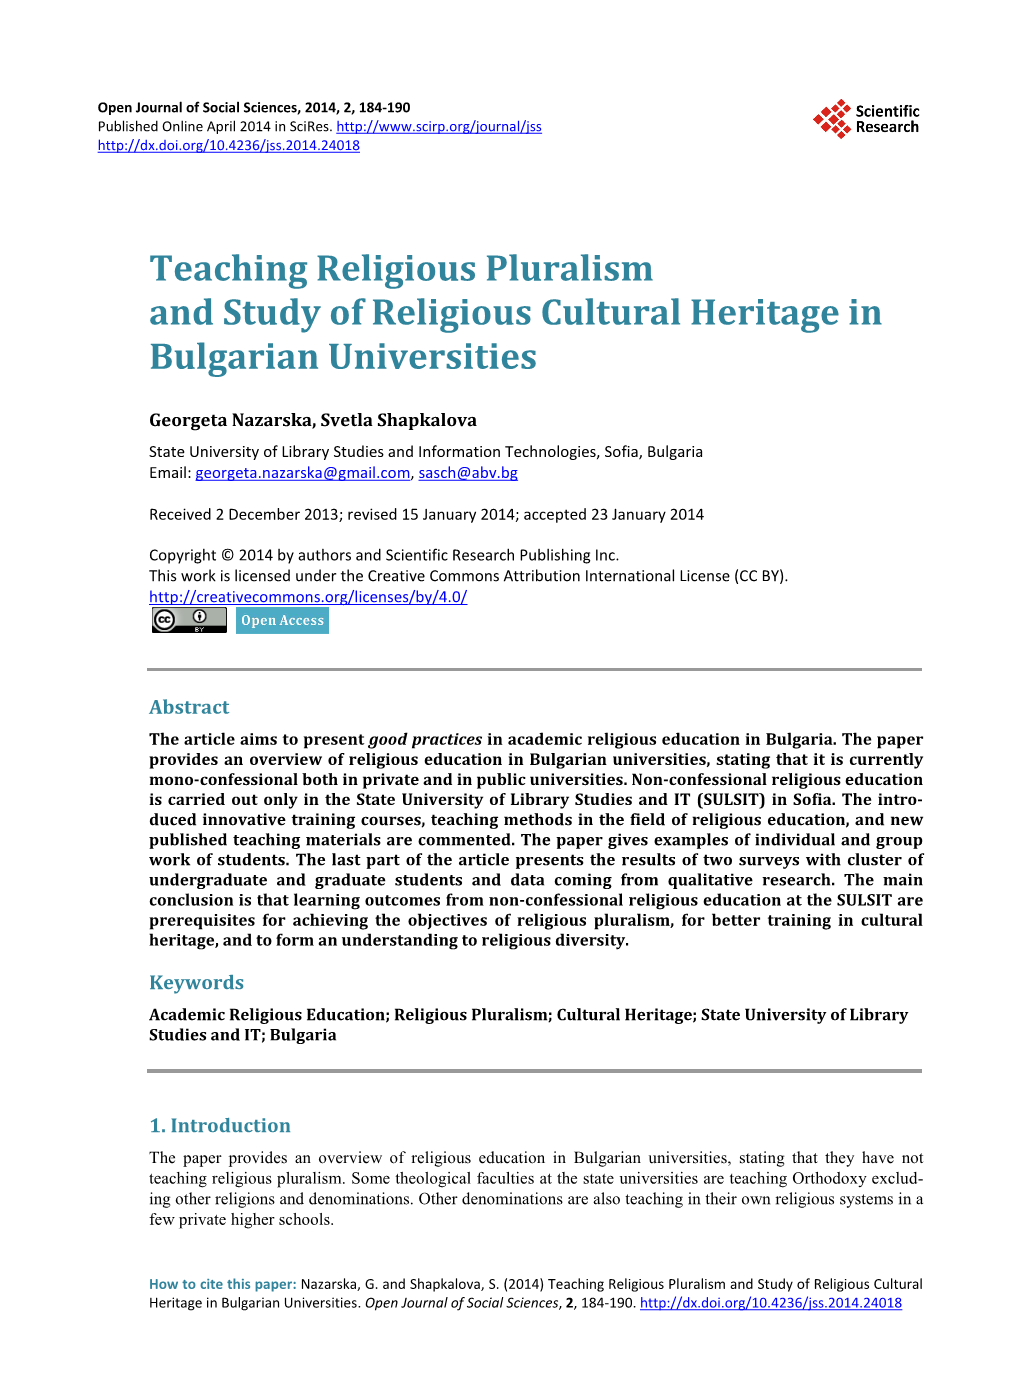 Teaching Religious Pluralism and Study of Religious Cultural Heritage in Bulgarian Universities